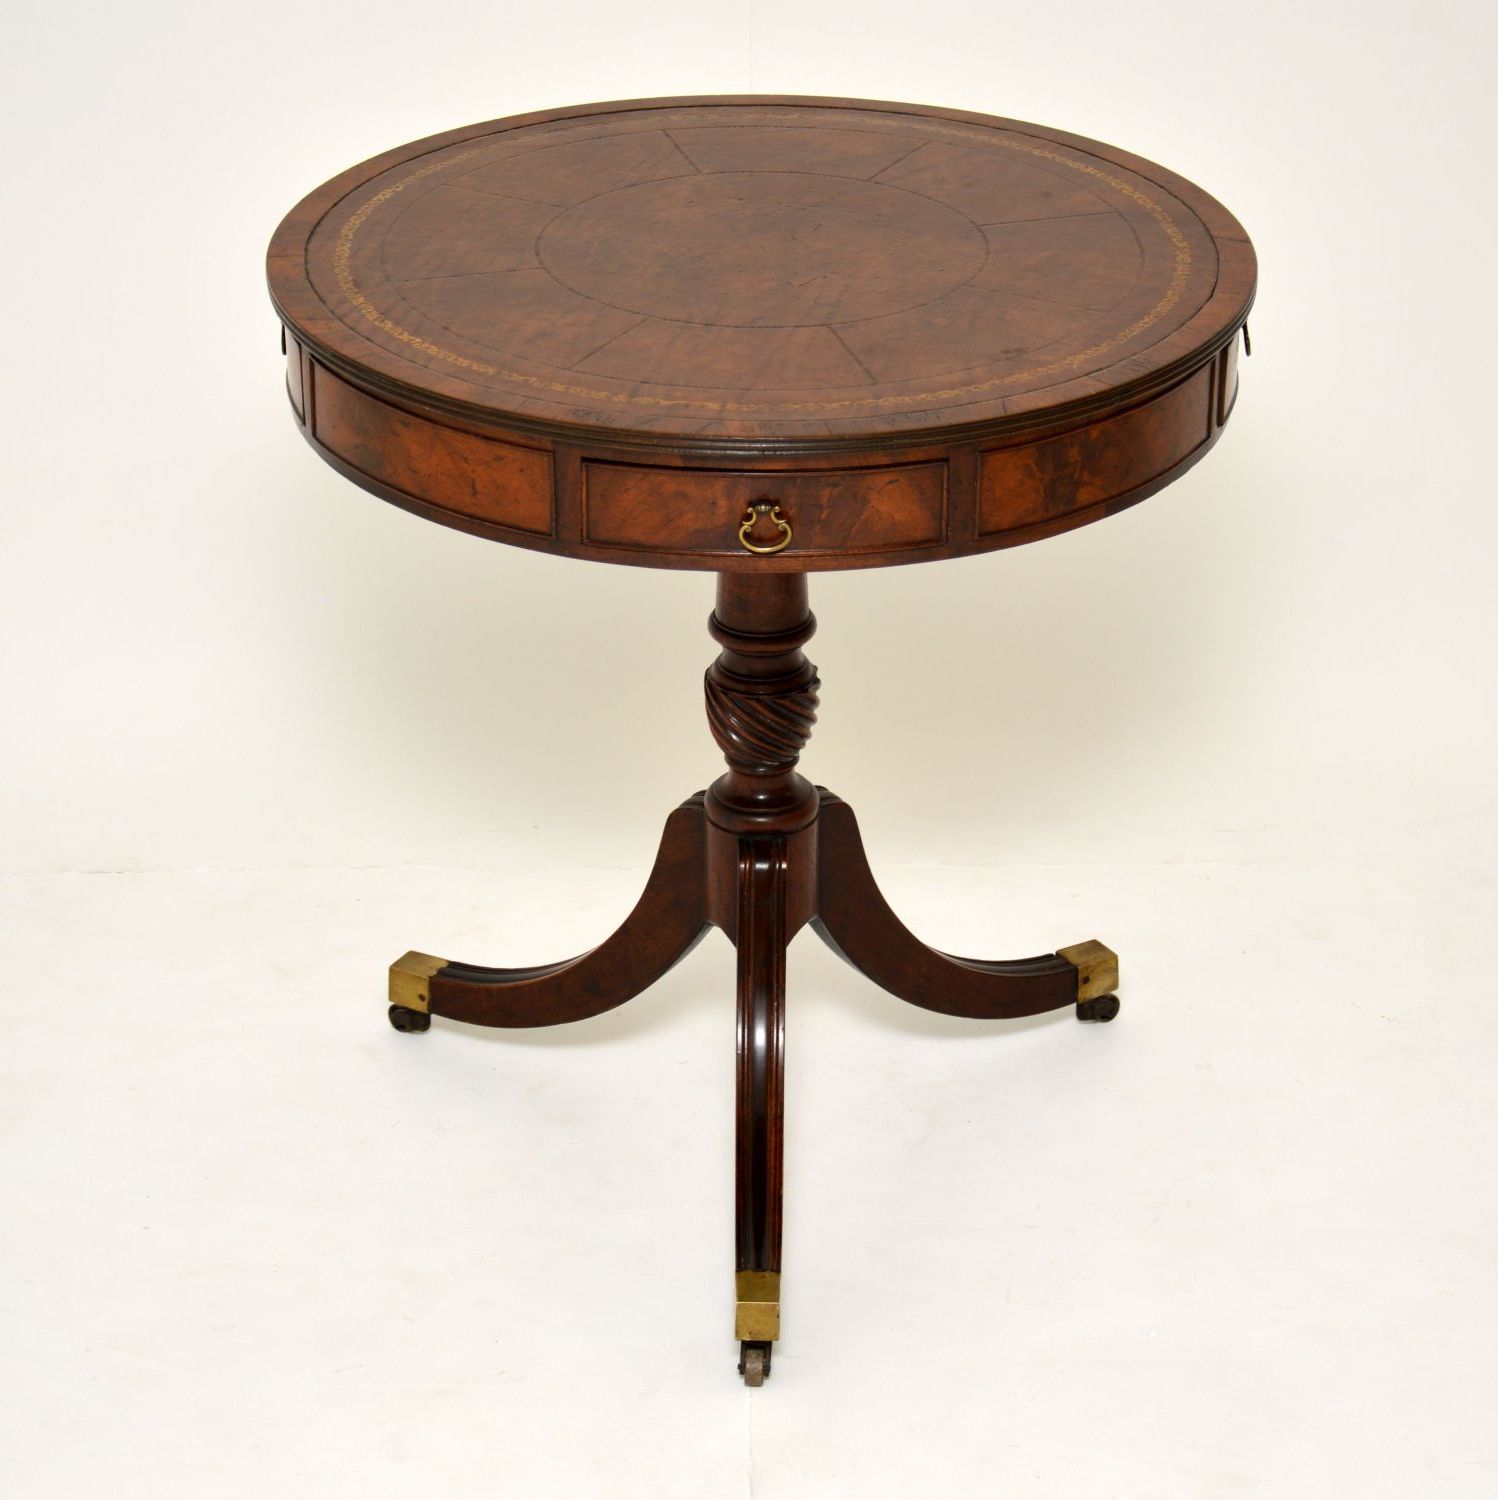 Newest Antique Mahogany Leather Top Revolving Drum Table – Marylebone Antiques Within Antique Cocktail Tables (View 6 of 10)